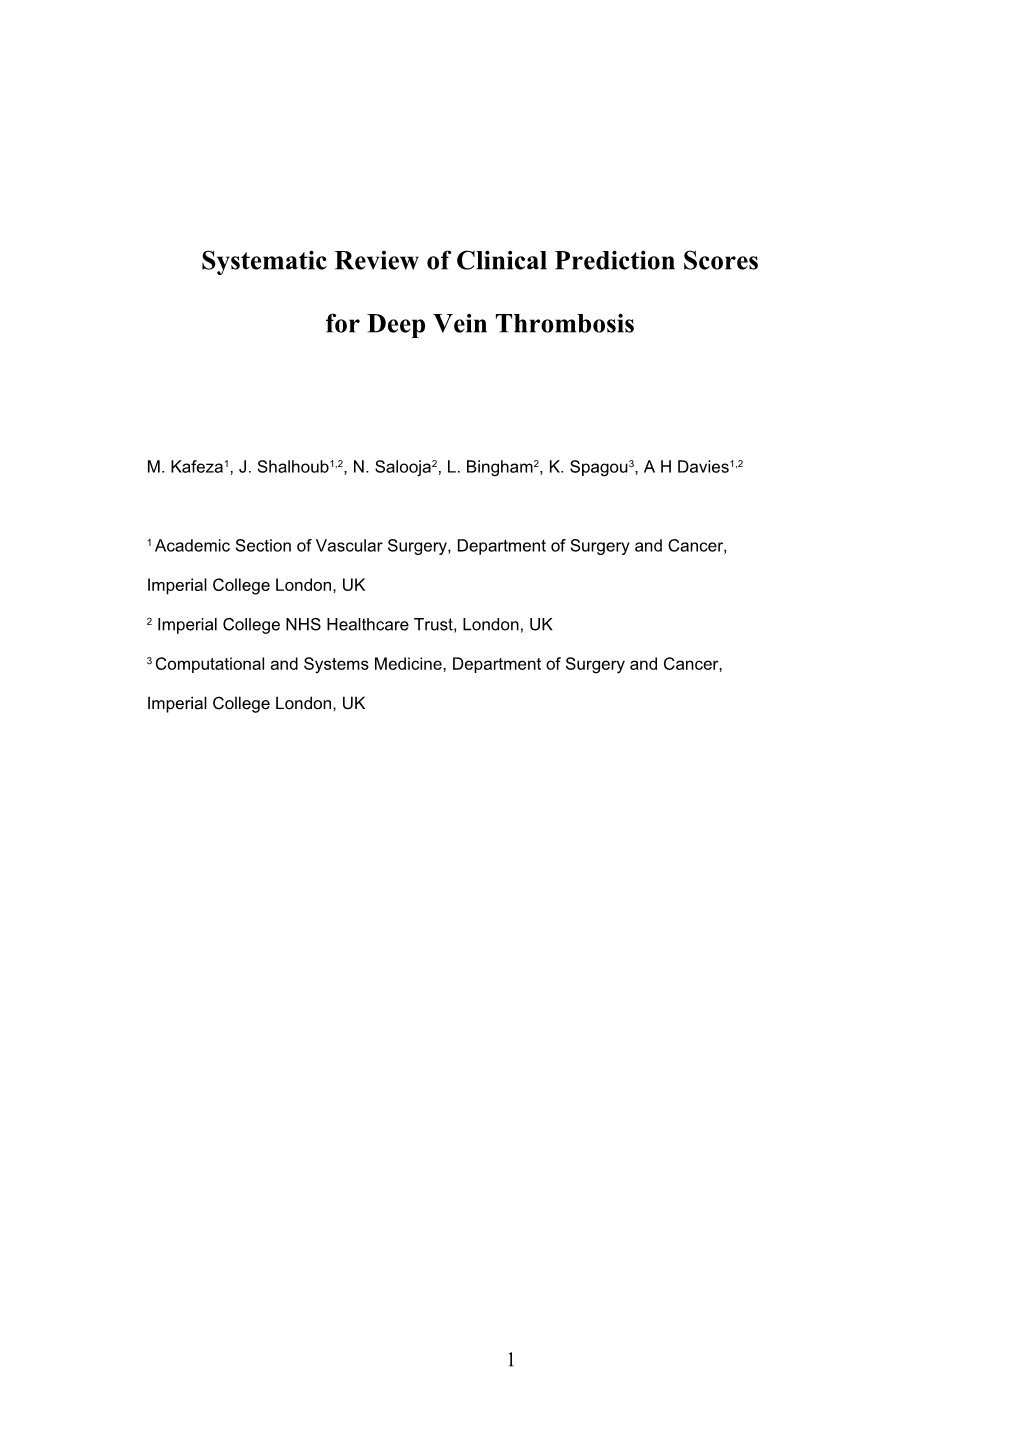 Systematic Review of Clinical Prediction Scores